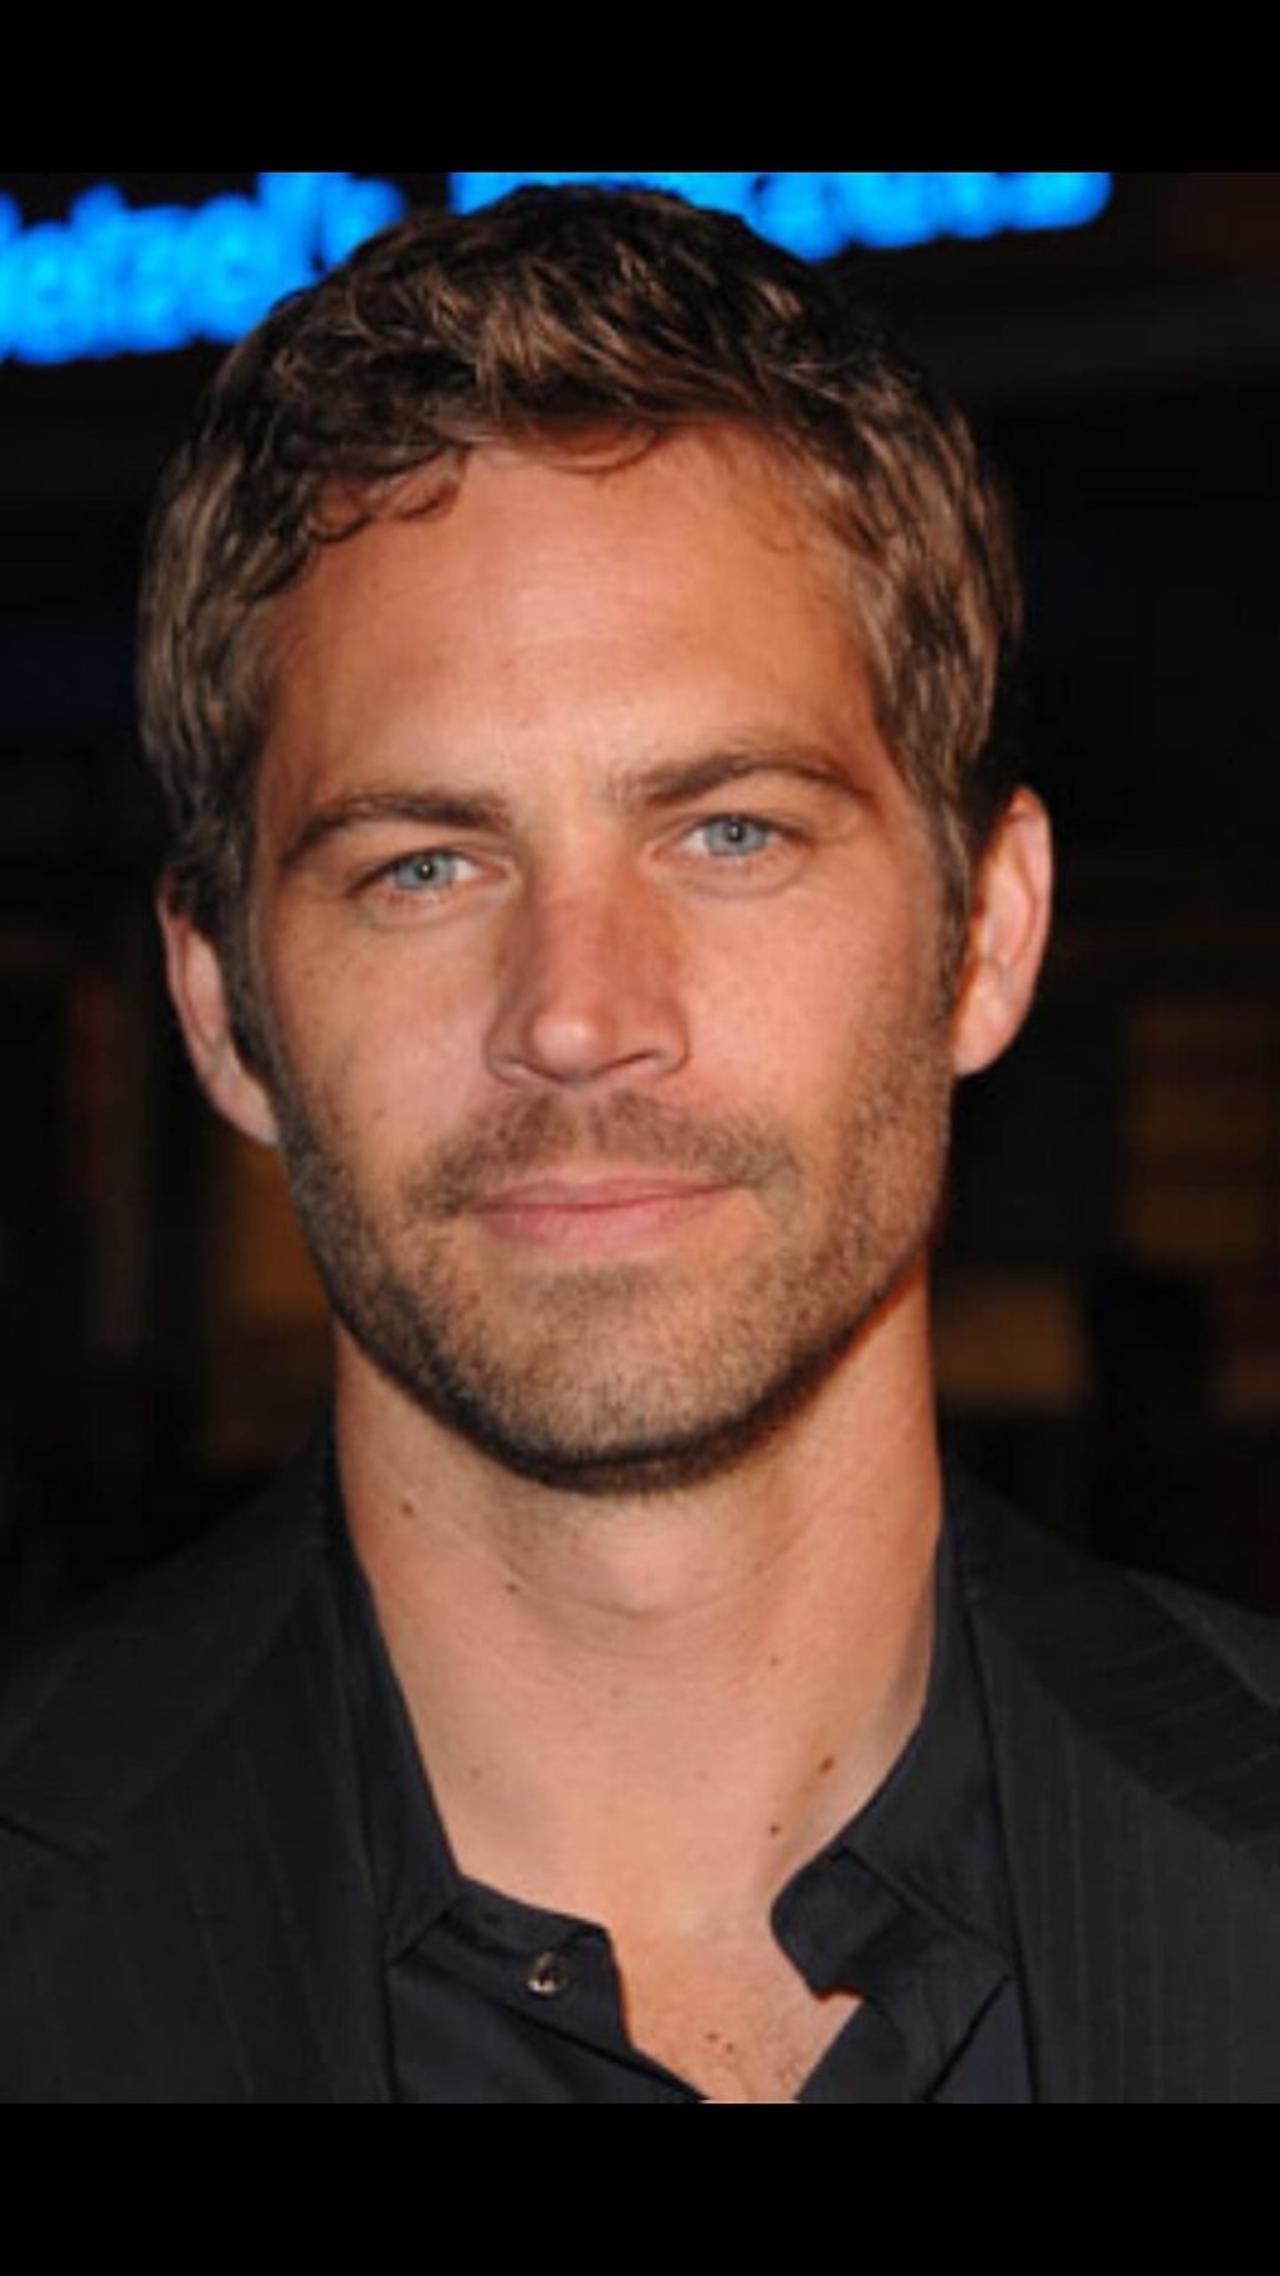 You know what the legend Paul walker said ?